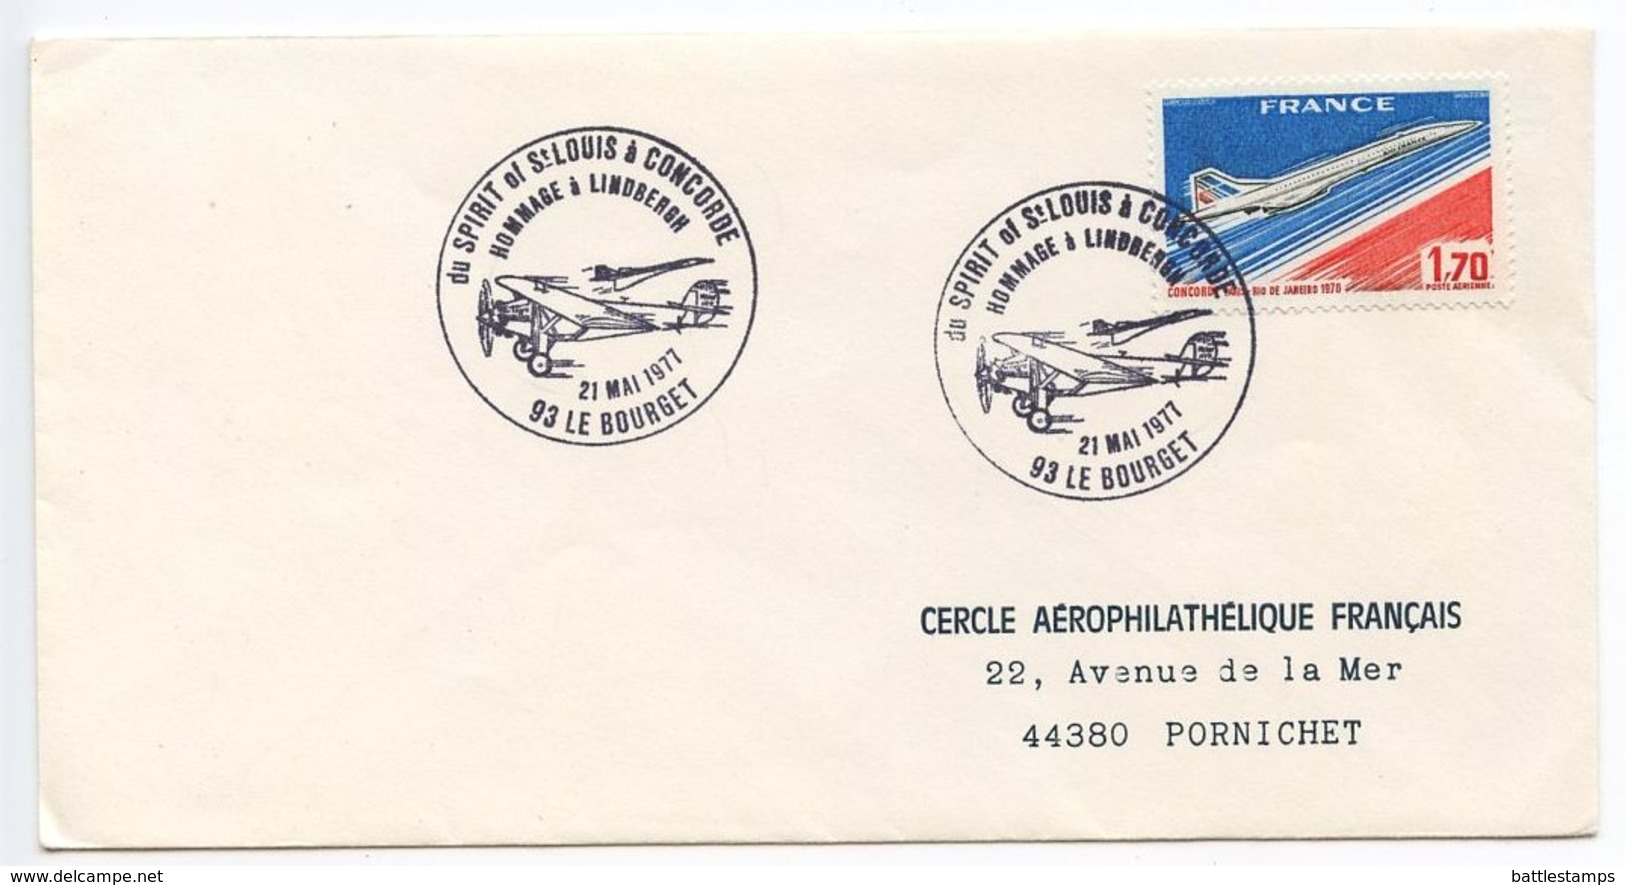 France 1977 Le Bourget, Hommage To Lindbergh & Spirit Of St. Louis Cover - Commemorative Postmarks